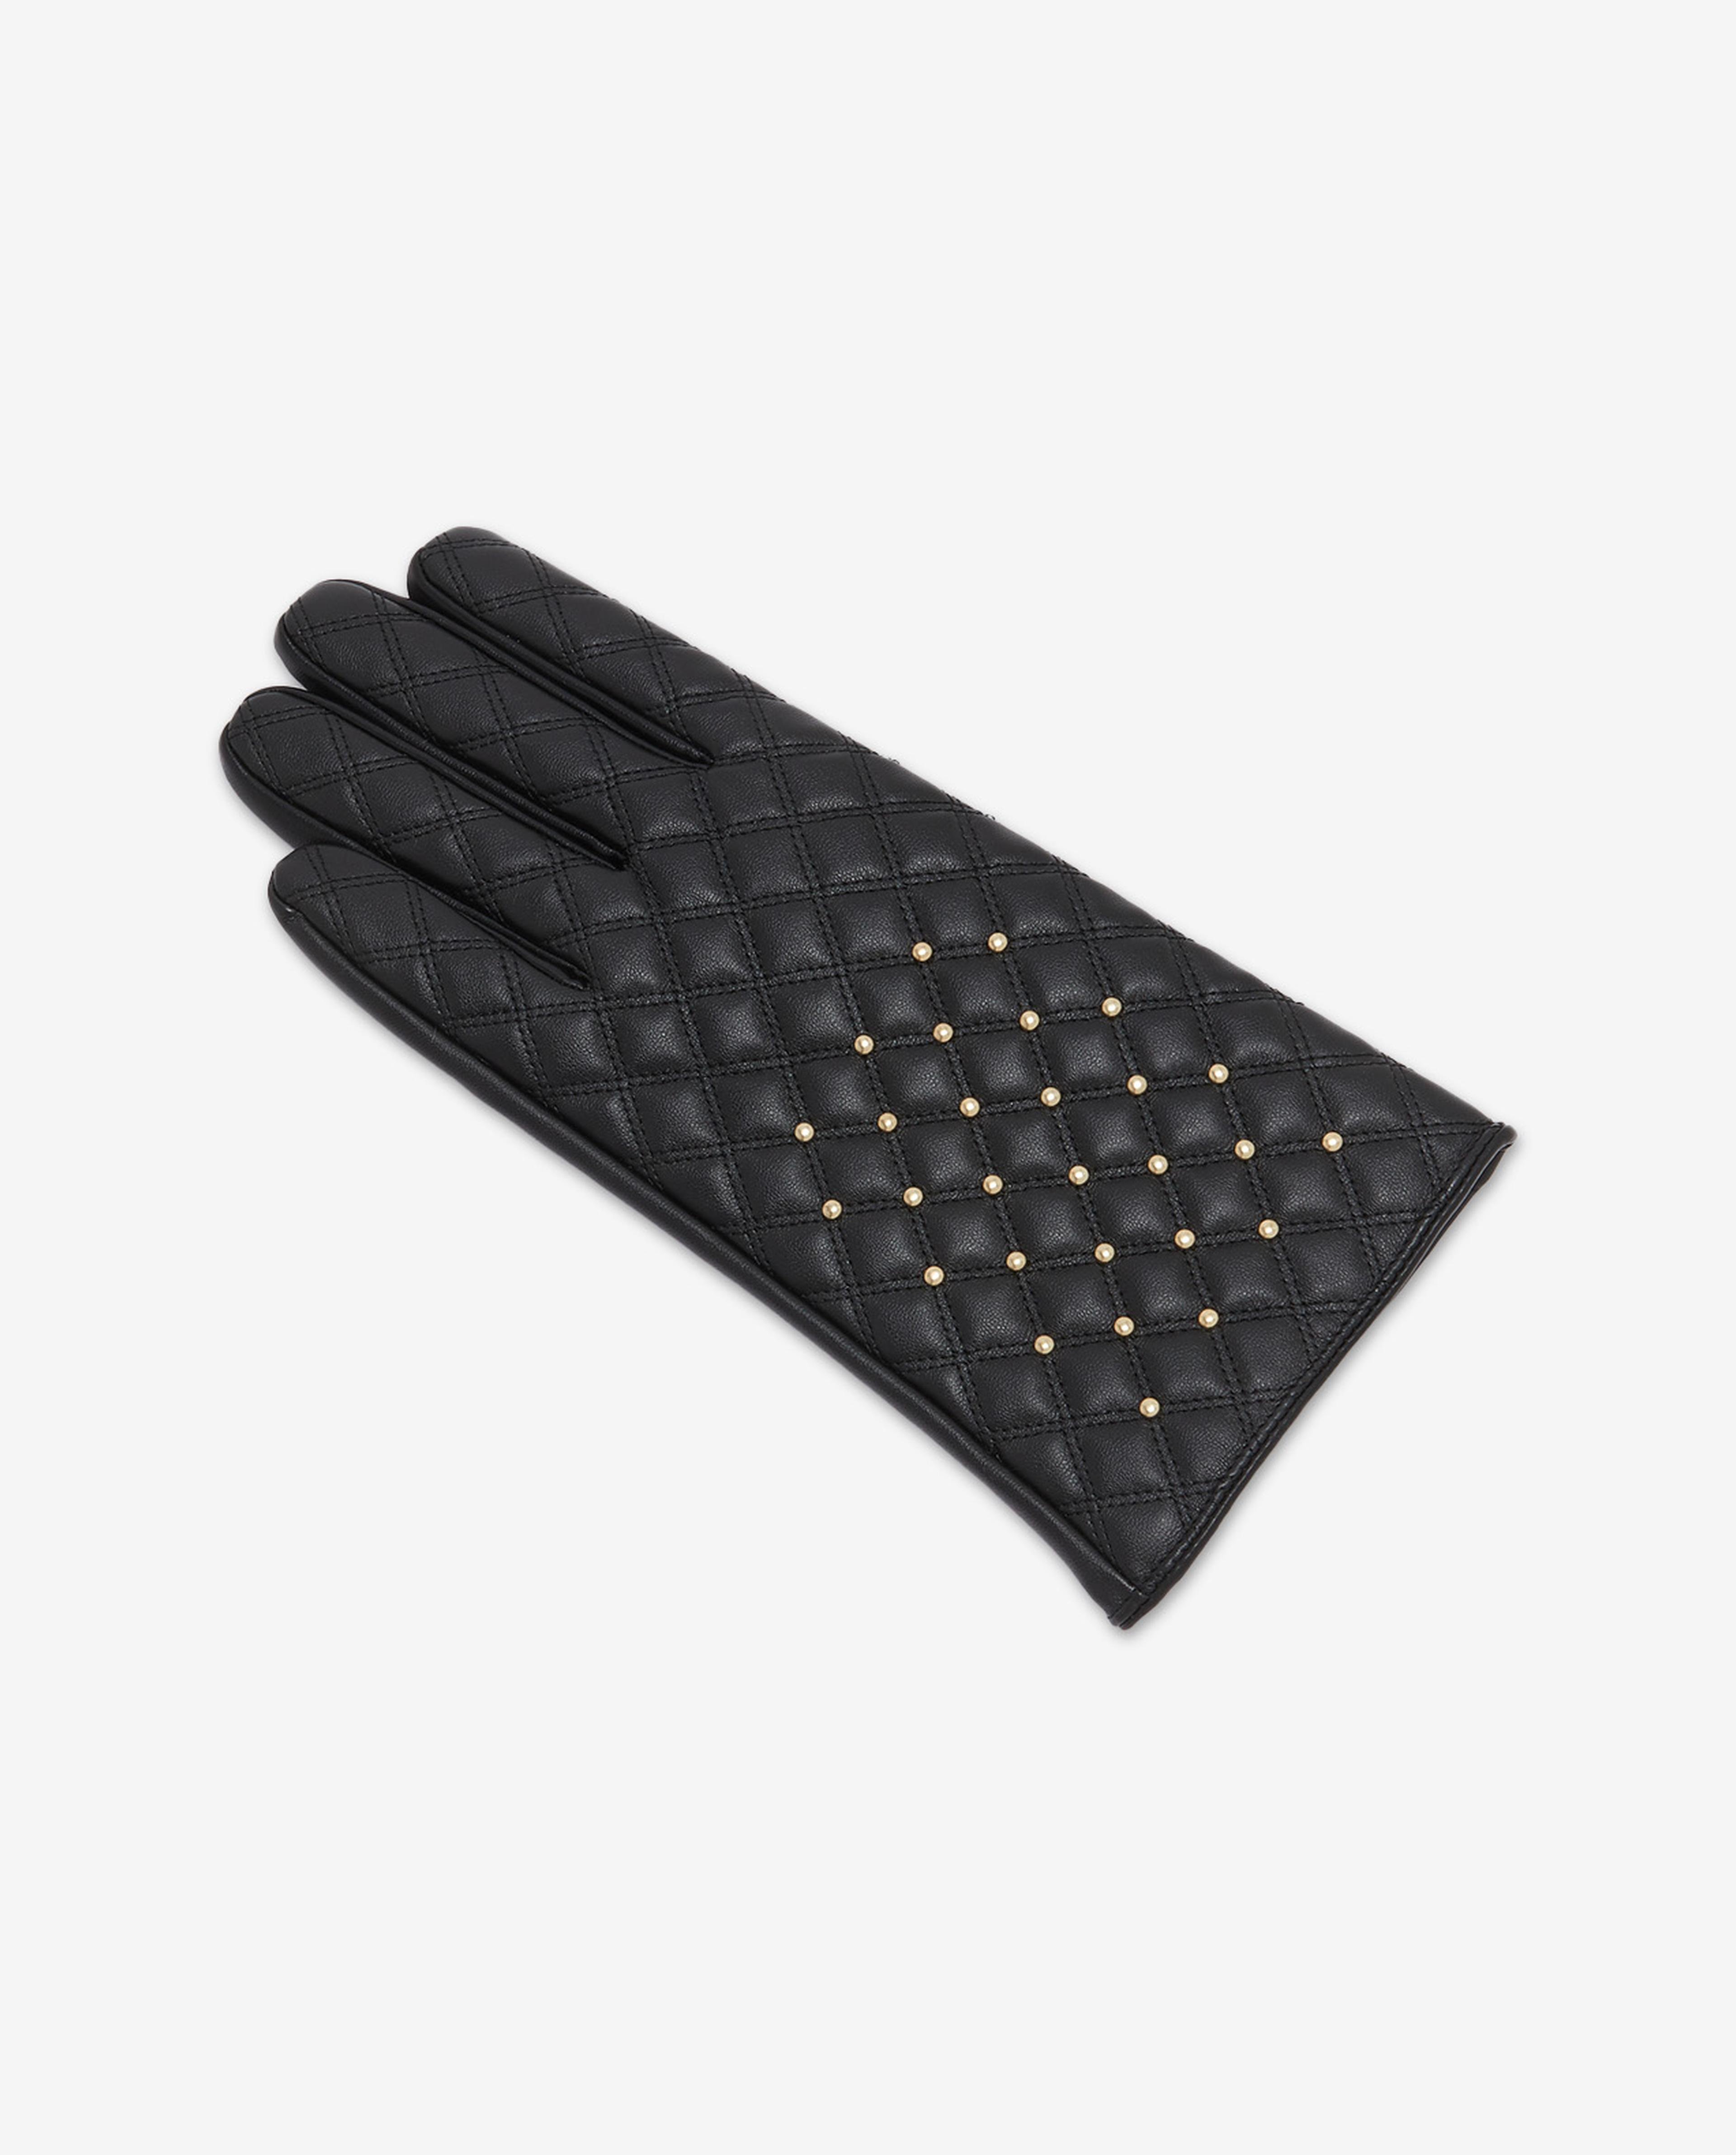 Solid PU Gloves